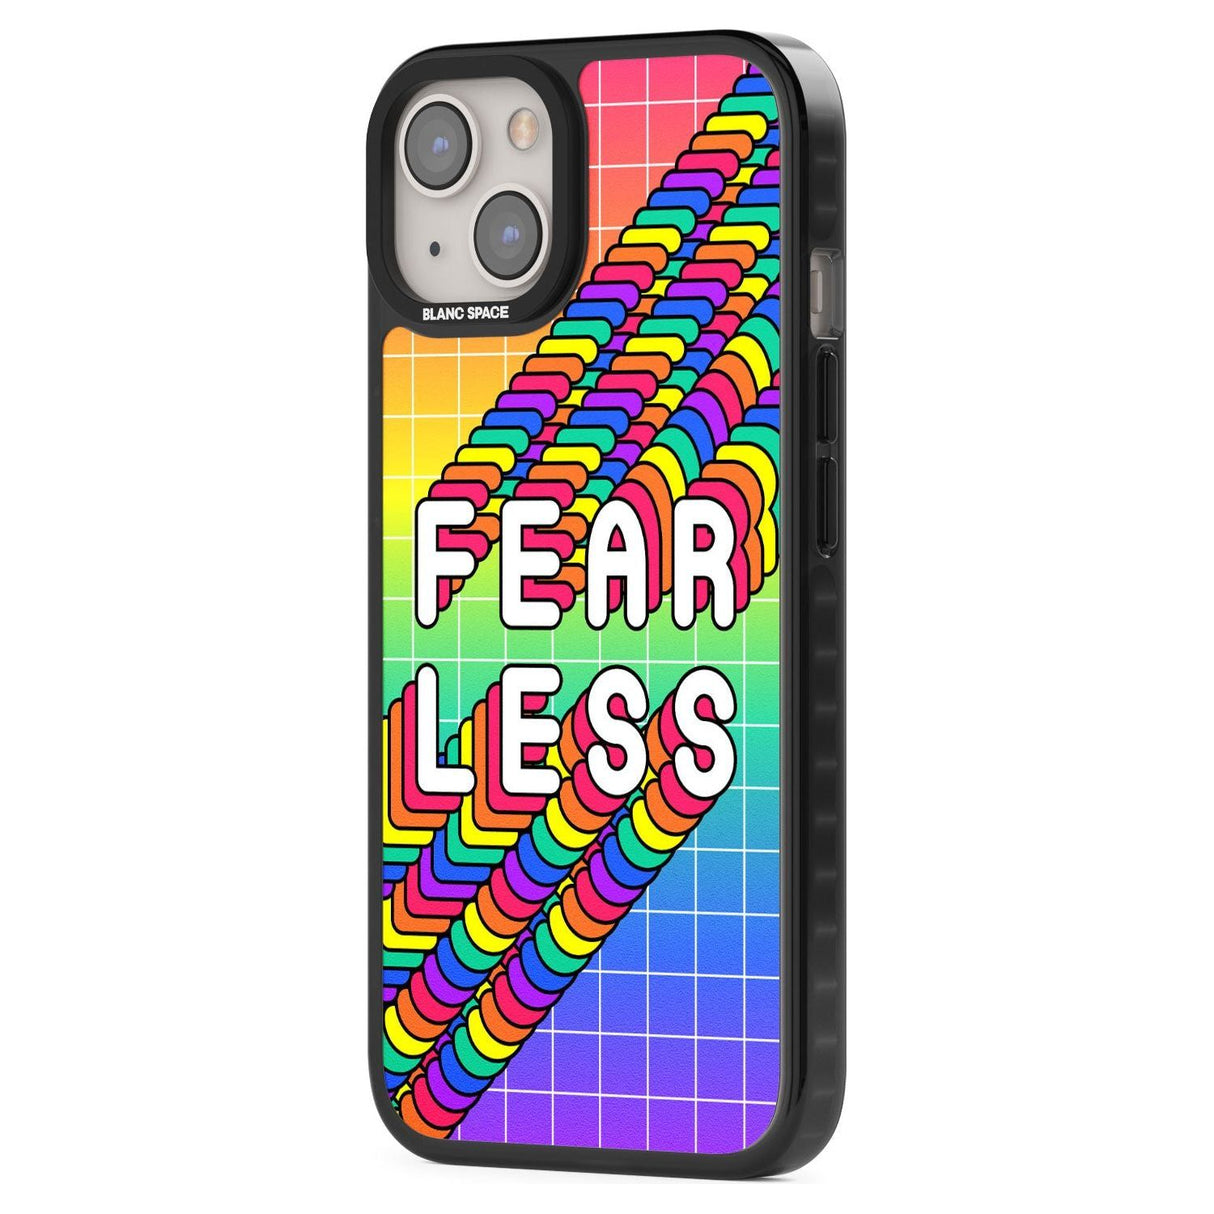 Fearless Phone Case iPhone 15 Pro Max / Black Impact Case,iPhone 15 Plus / Black Impact Case,iPhone 15 Pro / Black Impact Case,iPhone 15 / Black Impact Case,iPhone 15 Pro Max / Impact Case,iPhone 15 Plus / Impact Case,iPhone 15 Pro / Impact Case,iPhone 15 / Impact Case,iPhone 15 Pro Max / Magsafe Black Impact Case,iPhone 15 Plus / Magsafe Black Impact Case,iPhone 15 Pro / Magsafe Black Impact Case,iPhone 15 / Magsafe Black Impact Case,iPhone 14 Pro Max / Black Impact Case,iPhone 14 Plus / Black Impact Case,